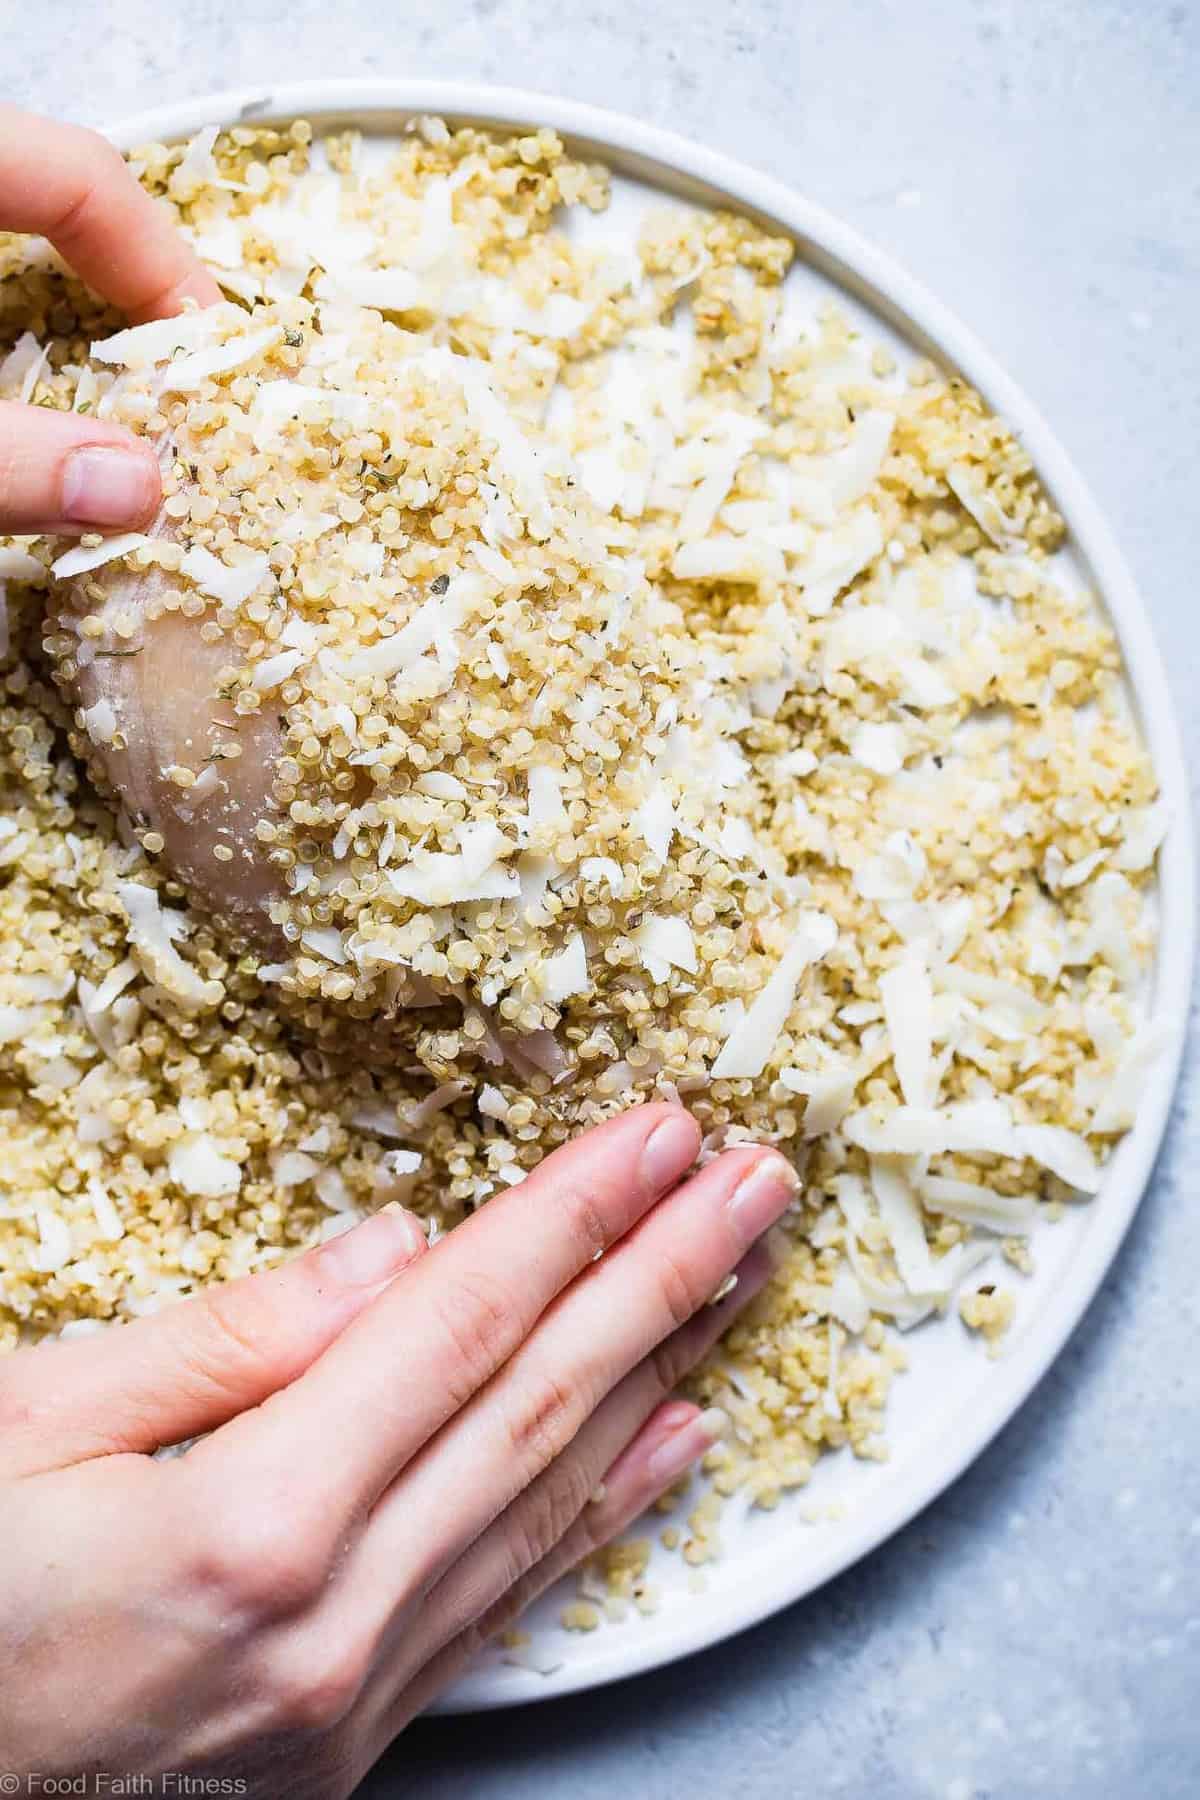 Goat Cheese Quinoa Crusted Chicken - A quick, healthy and gluten free dinner that feels fancy, but is so easy!  A perfect meal for busy weeknights that both kids and adults will love! | #Foodfaithfitness | #Glutenfree #Healthy #Cleaneating #Quinoa #Chickenrecipes